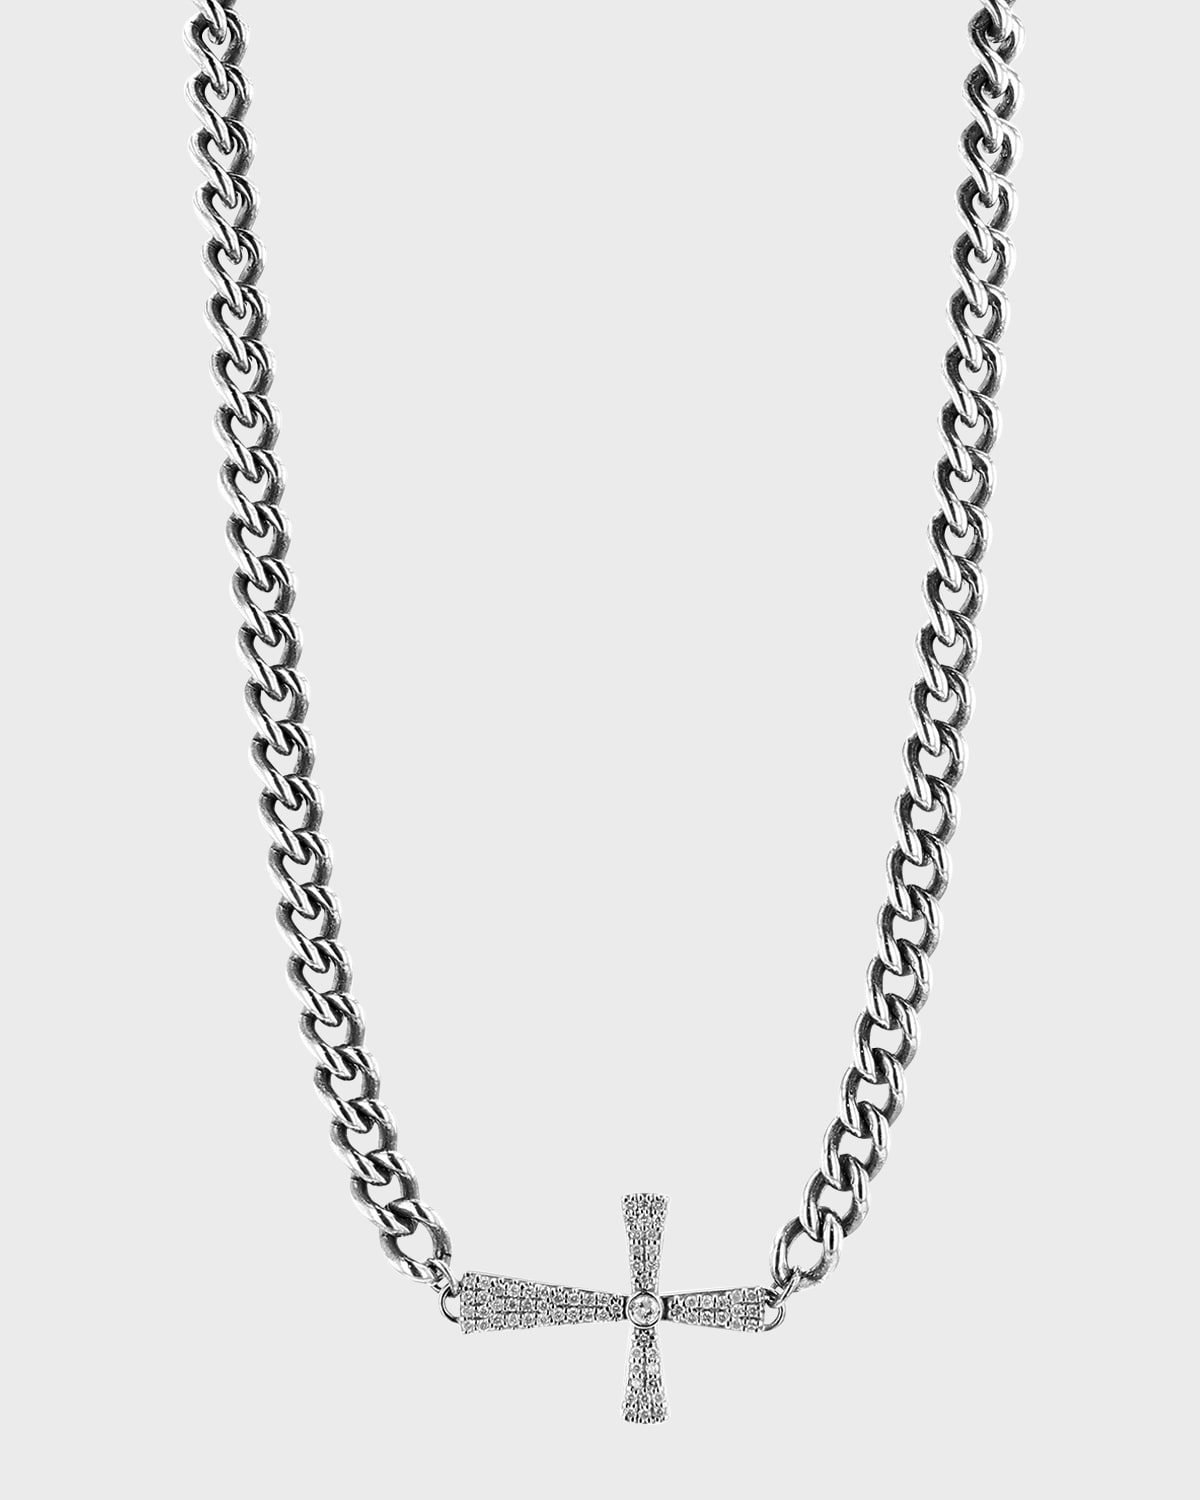 Details about   Football & Helmet Necklace Oxidized Matte Silver 30" Sterling Silver Plate Chain 